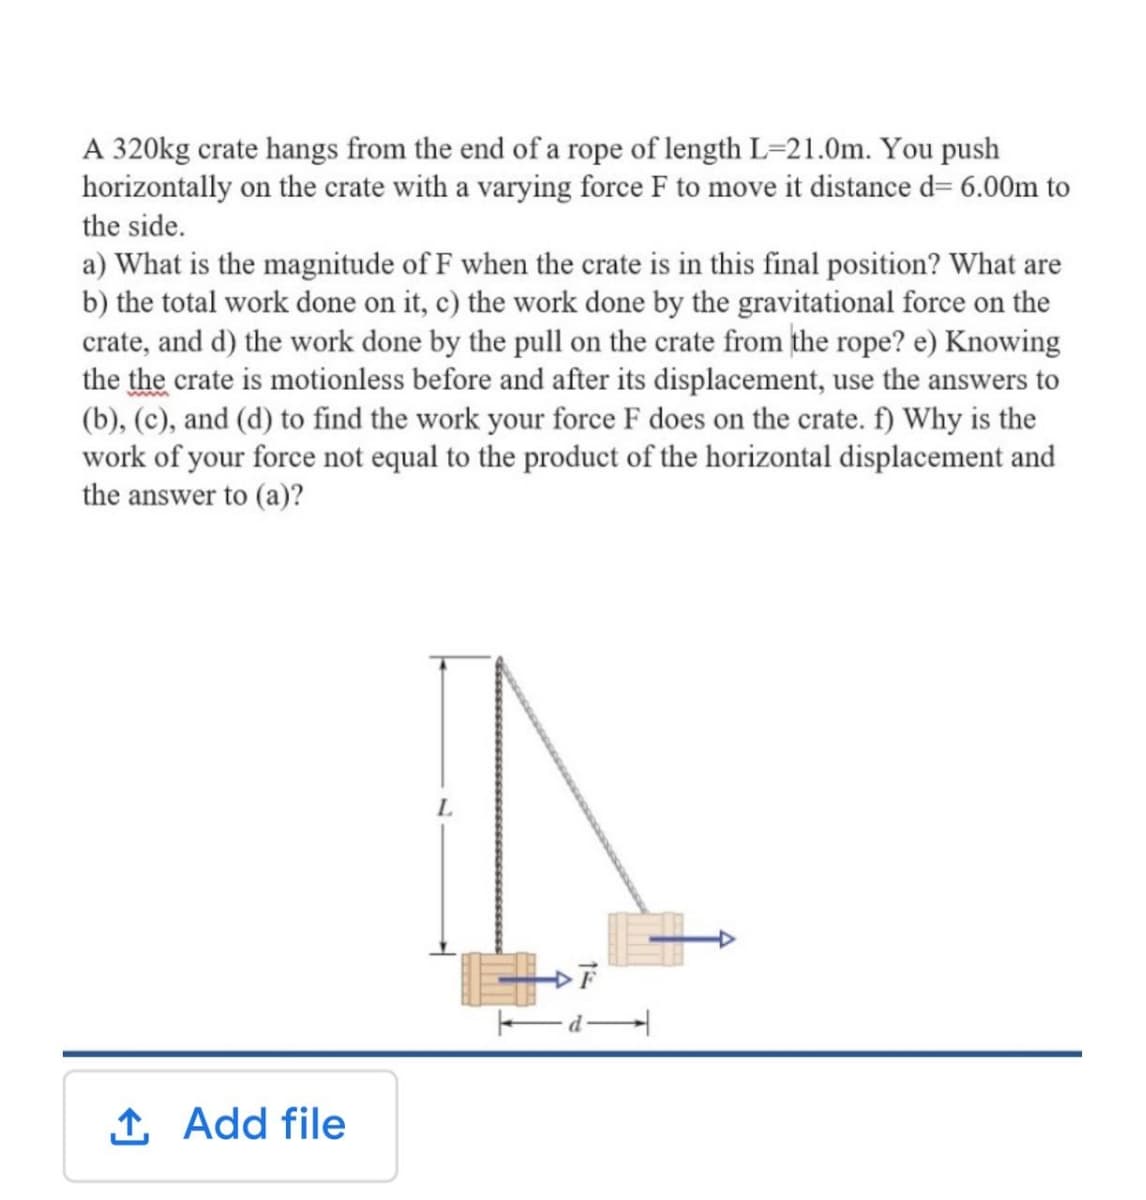 A 320kg crate hangs from the end of a rope of length L=21.0m. You push
horizontally on the crate with a varying force F to move it distance d= 6.00m to
the side.
a) What is the magnitude of F when the crate is in this final position? What are
b) the total work done on it, c) the work done by the gravitational force on the
crate, and d) the work done by the pull on the crate from the rope? e) Knowing
the the crate is motionless before and after its displacement, use the answers to
(b), (c), and (d) to find the work your force F does on the crate. f) Why is the
work of your force not equal to the product of the horizontal displacement and
the answer to (a)?
L.
1 Add file
